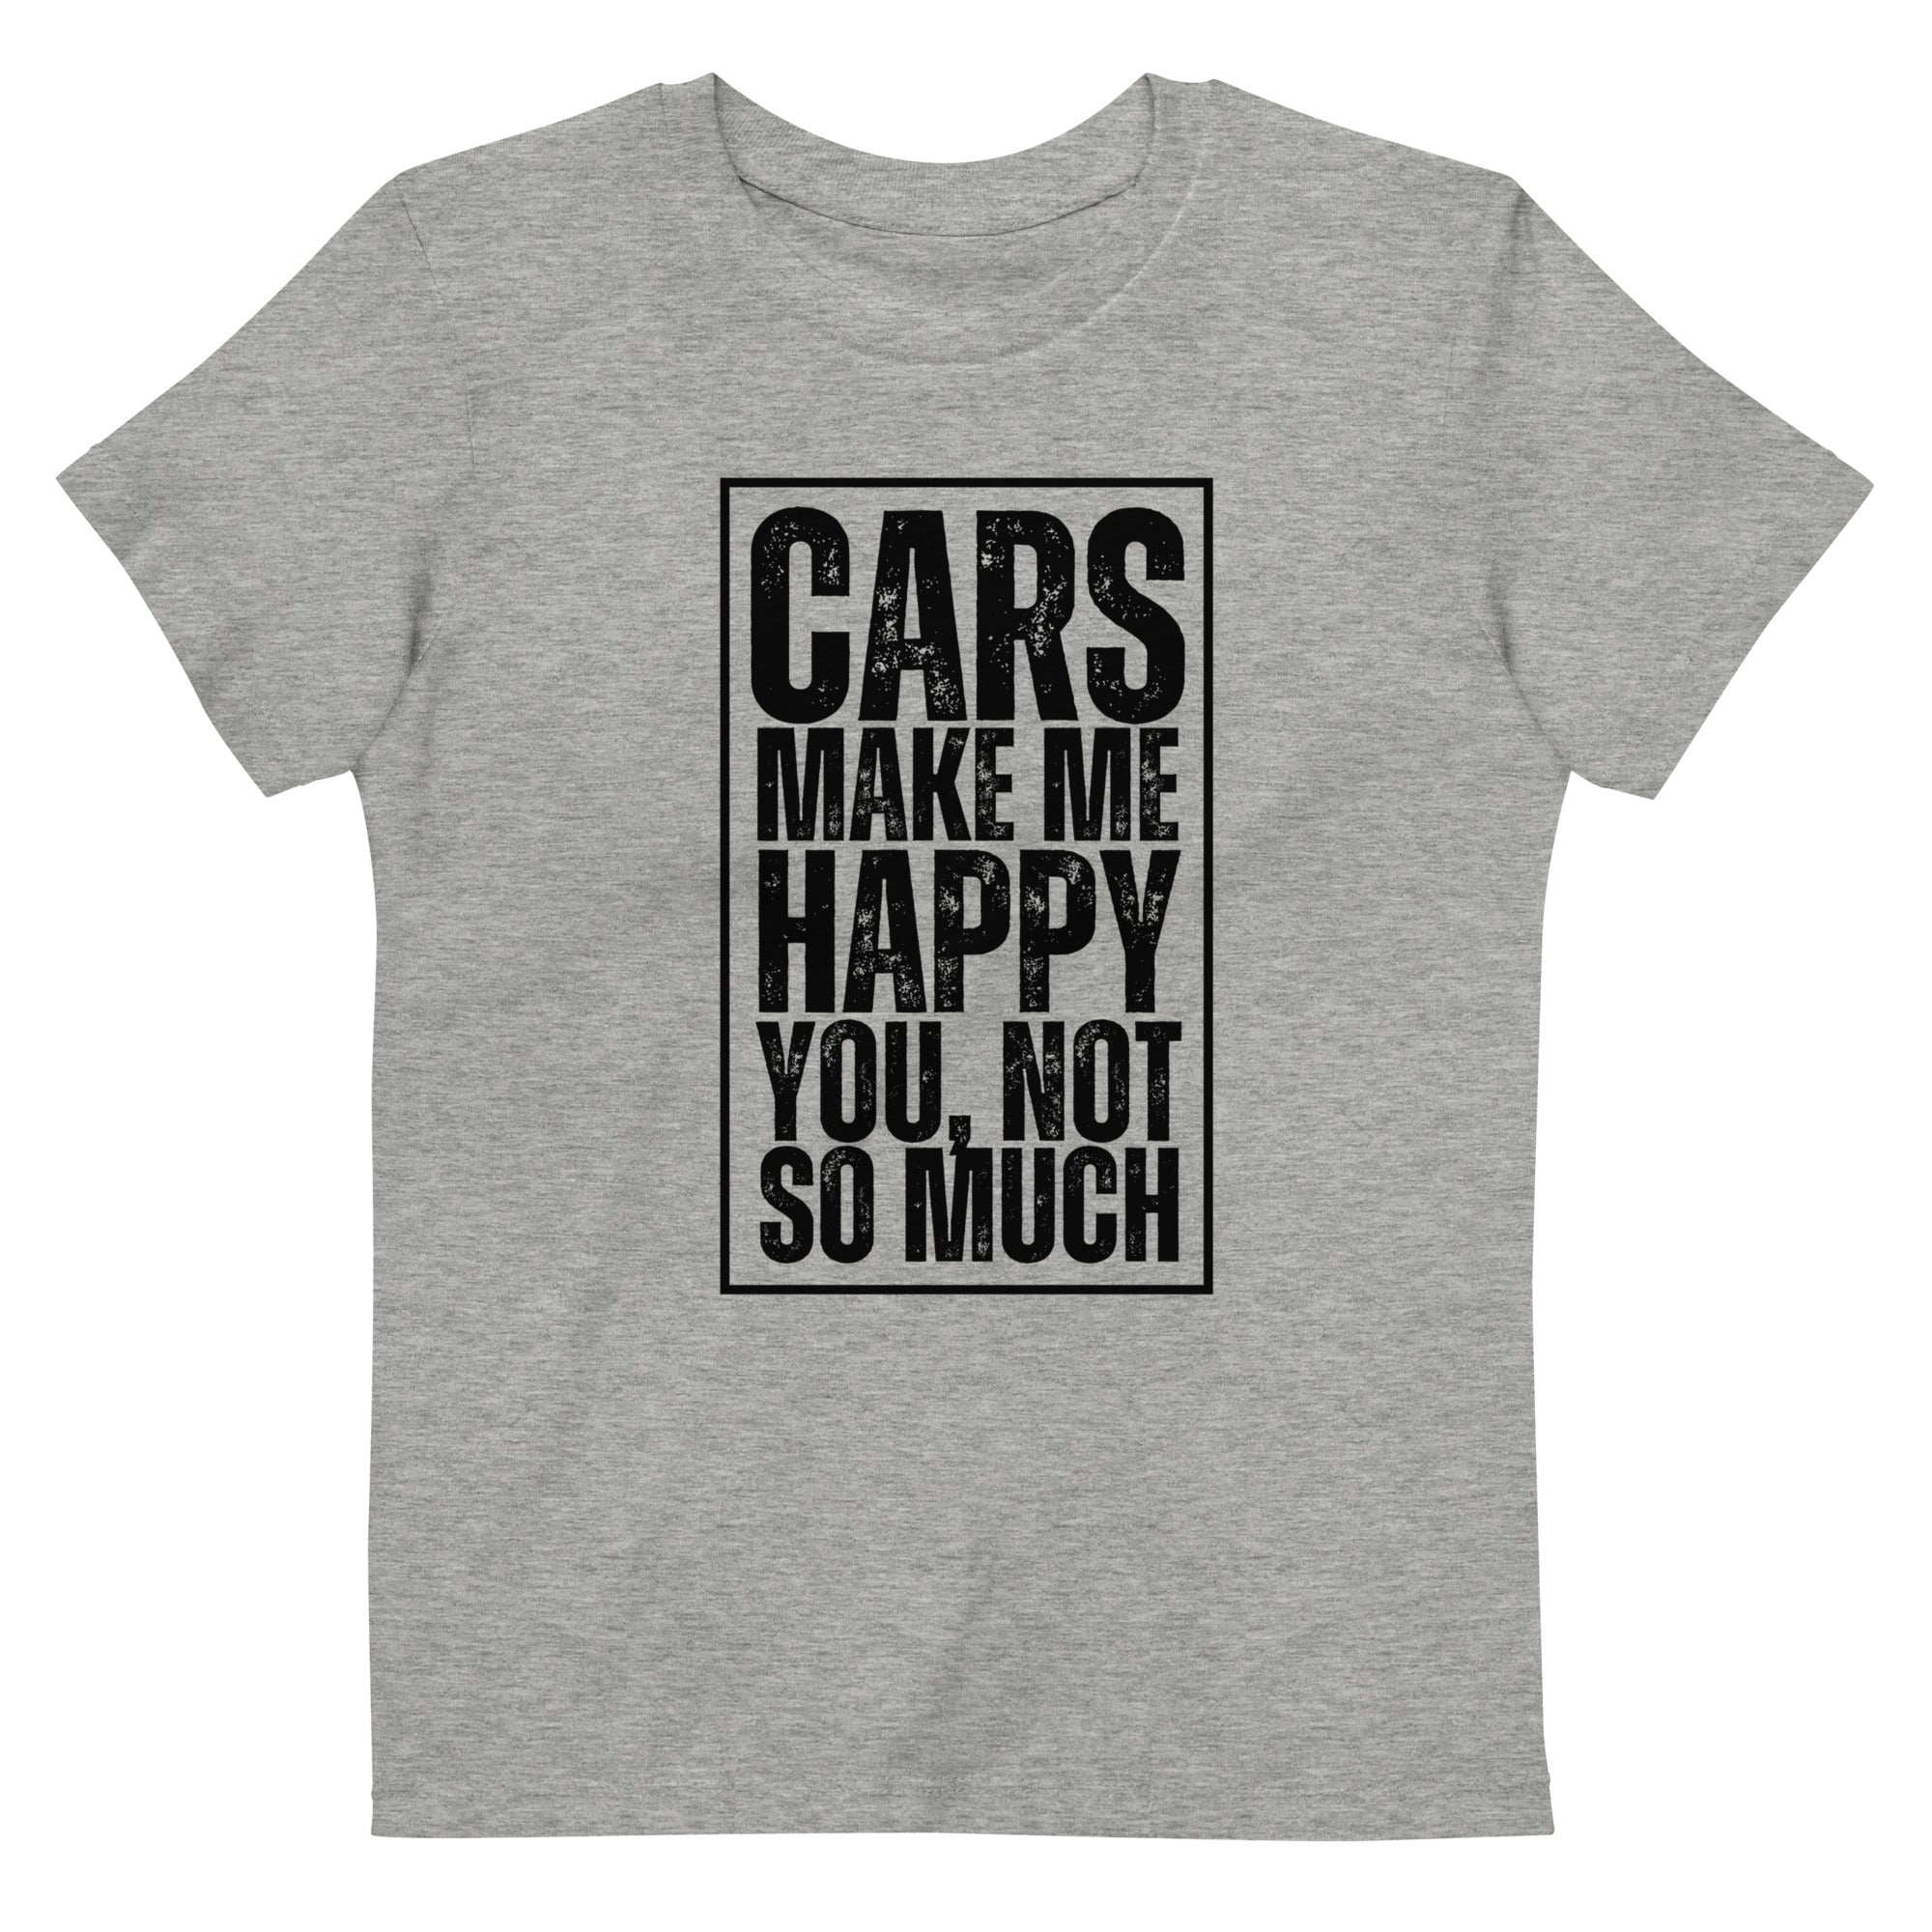 Cars Make Me Happy. You, Not So Much - Kids